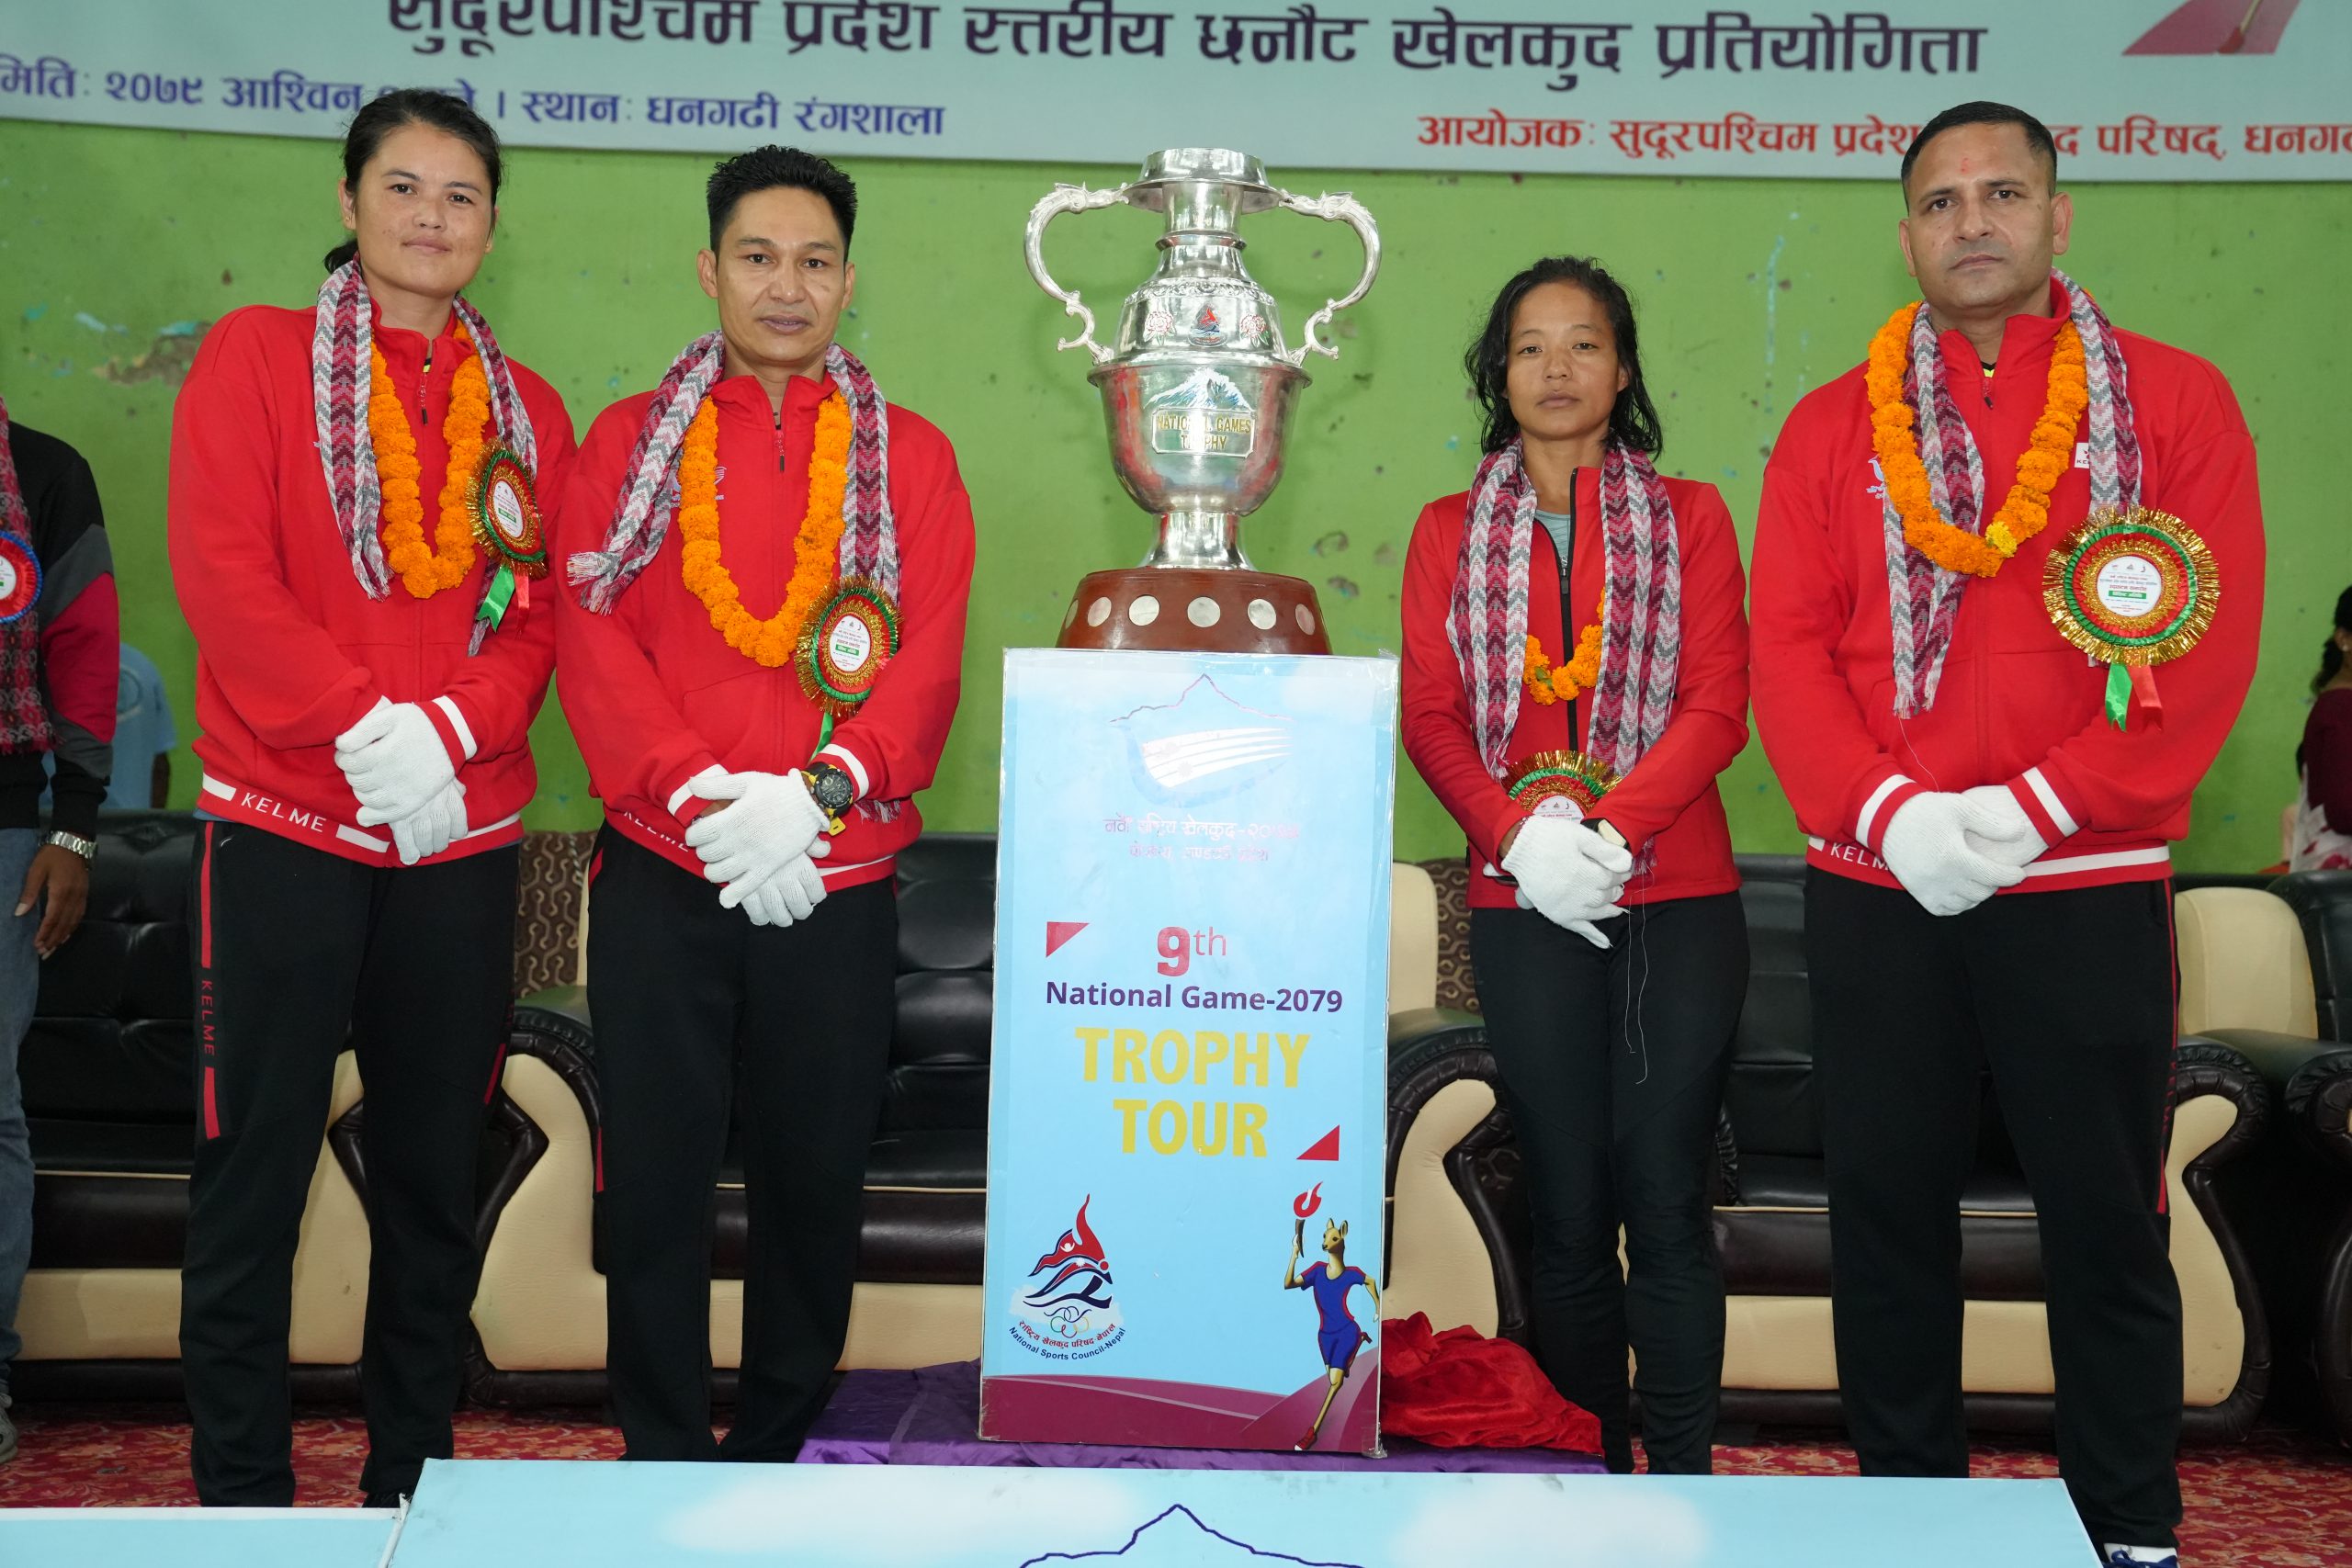 9th National Game Trophy Tour Photos